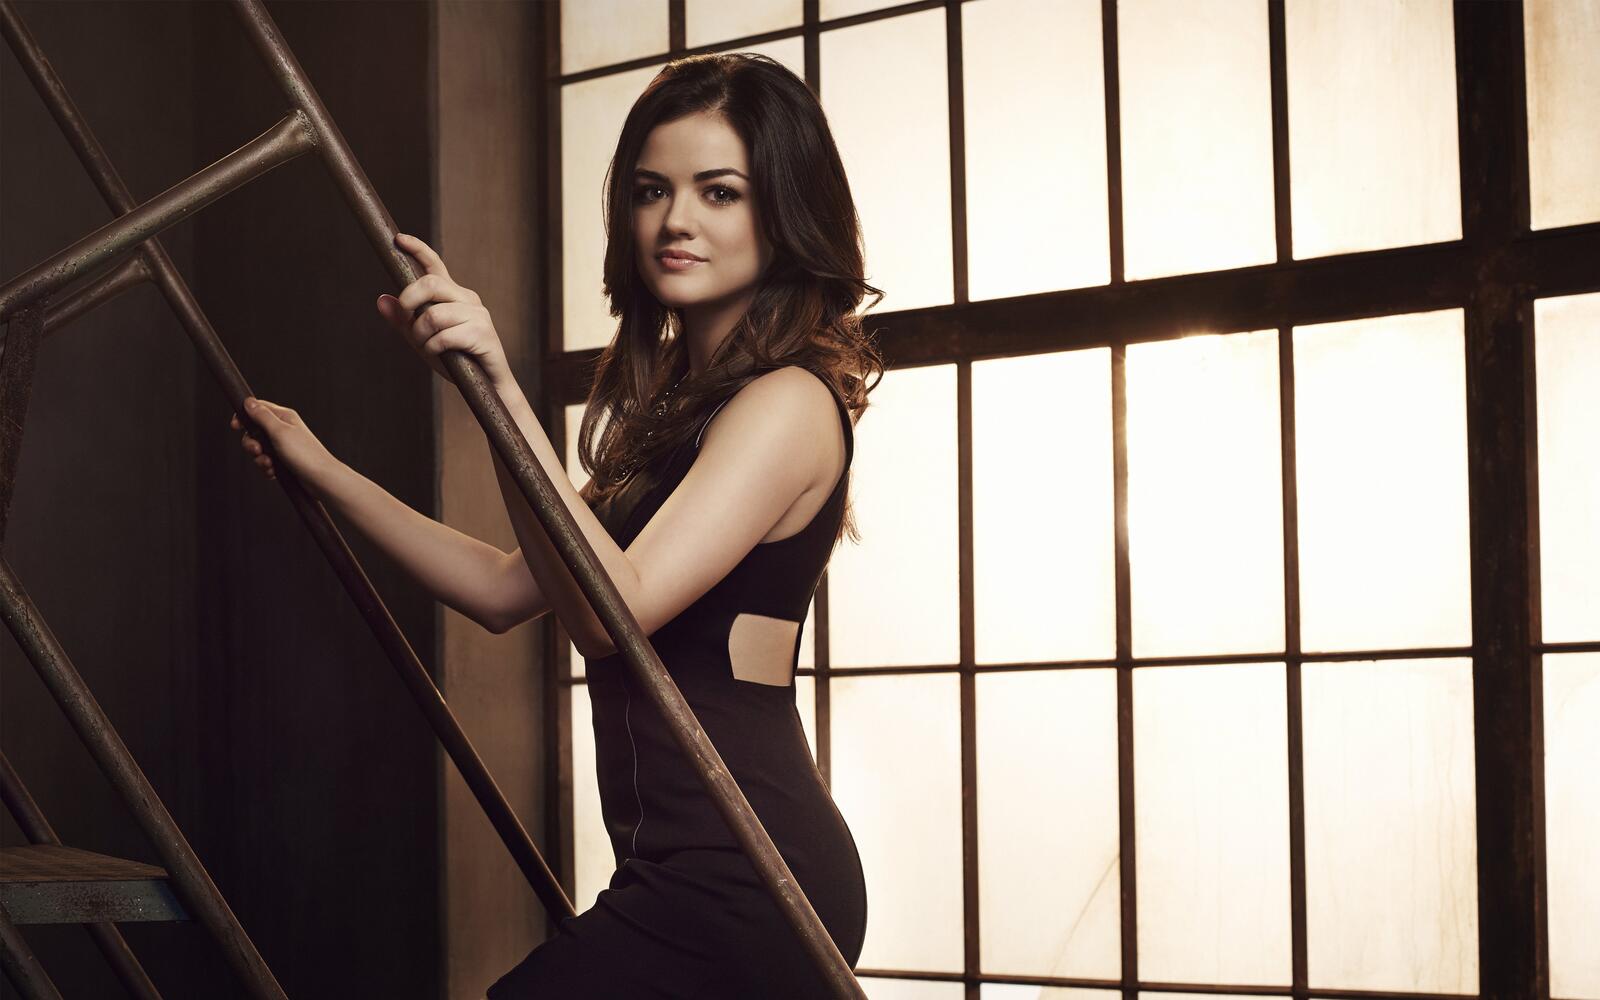 Wallpapers Lucy Hale actress woman on the desktop